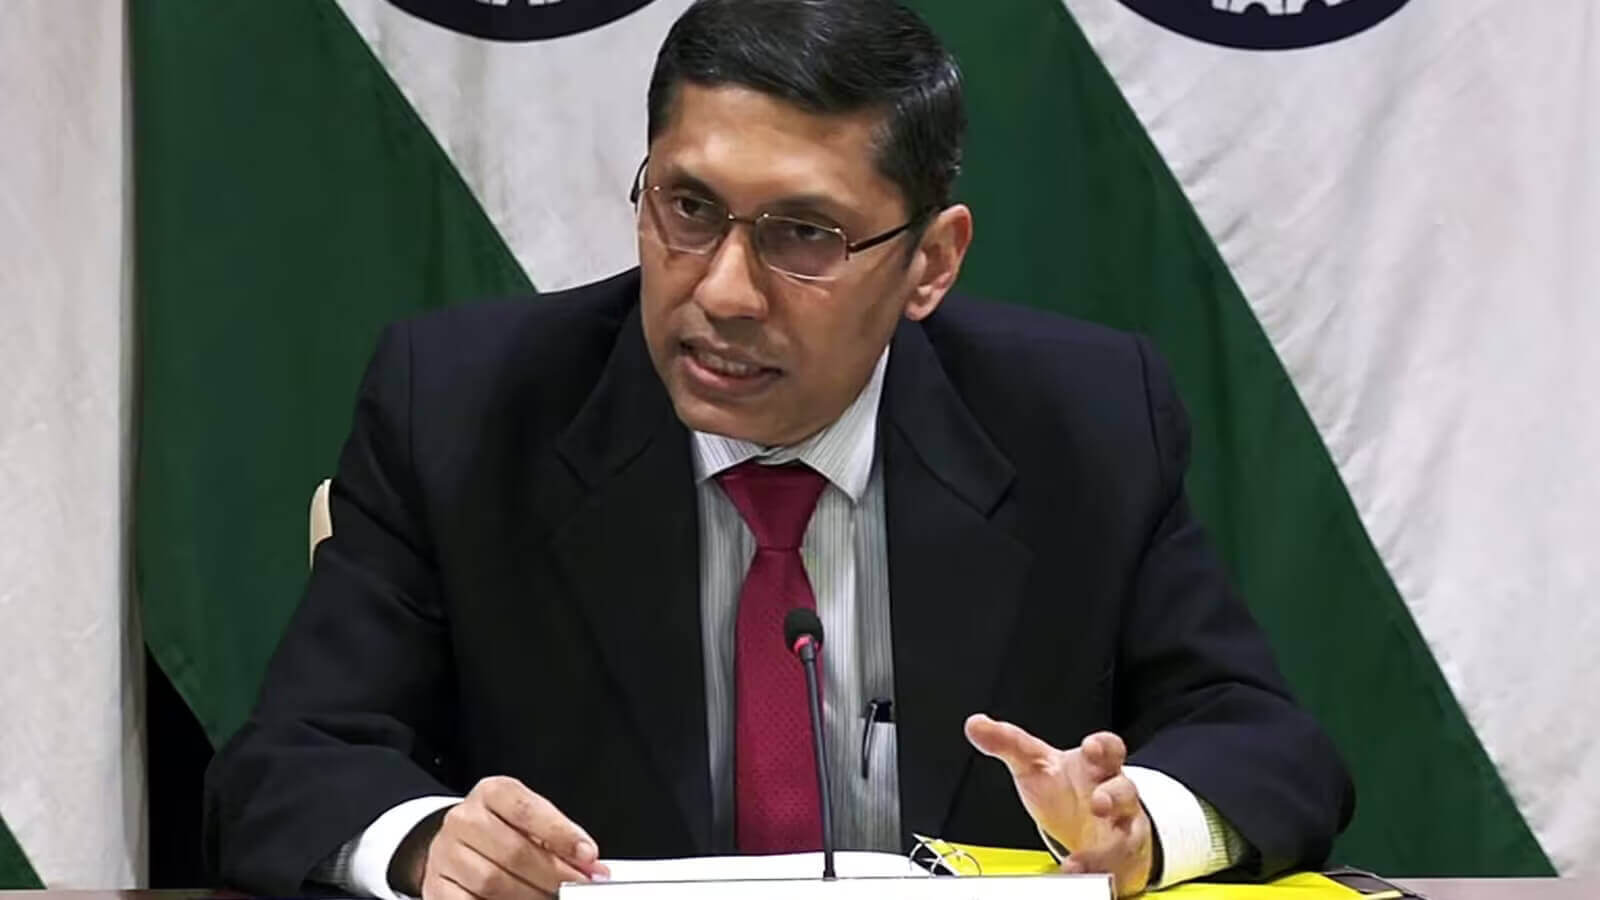 Indian MEA Report Highlights Pakistan’s Continued Support for Terrorism